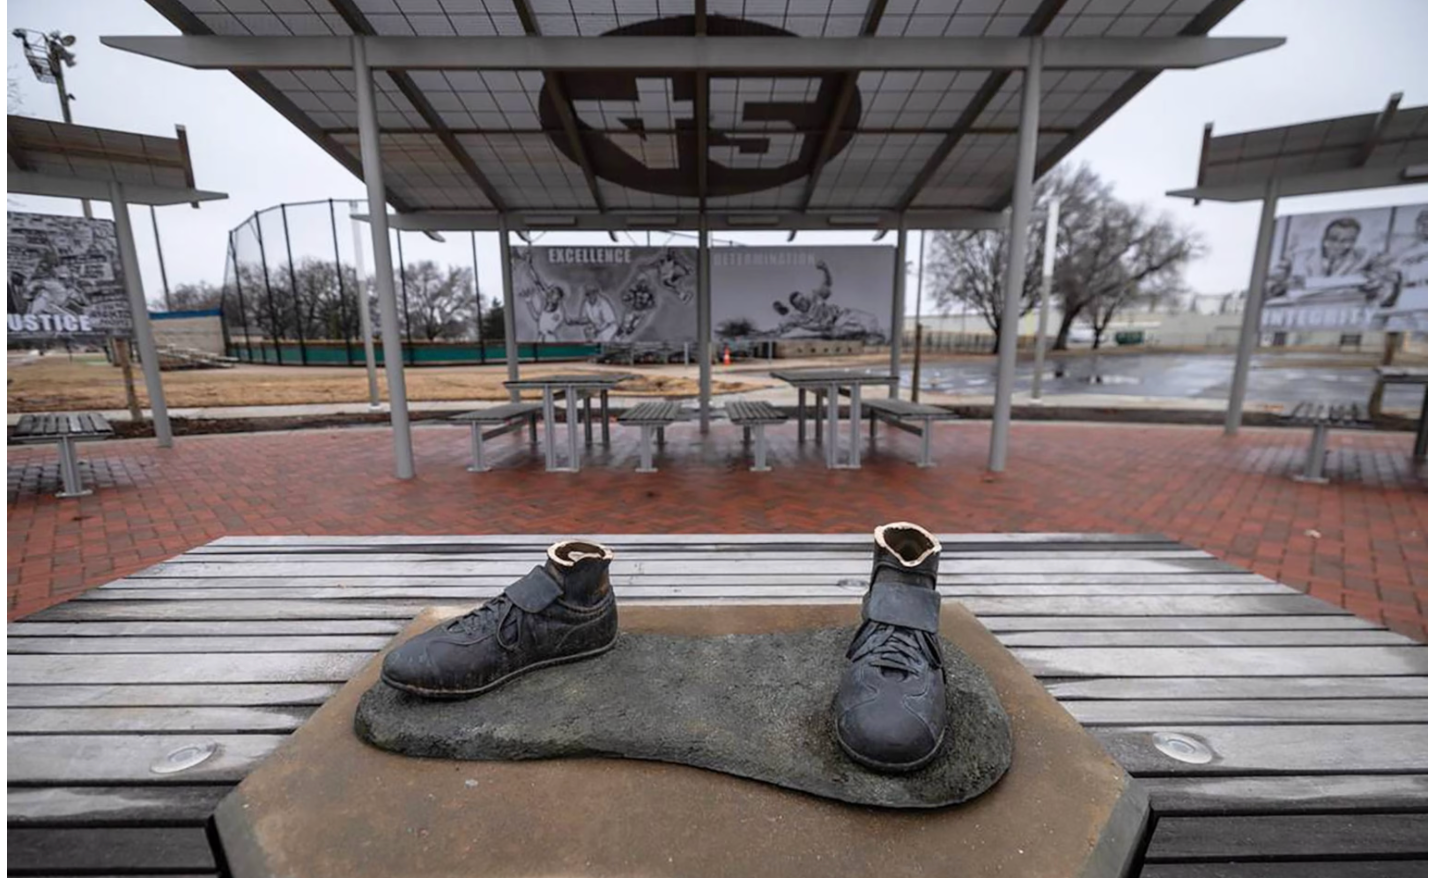 Stolen Jackie Robinson Statue Found "Dismantled And Burned" In Trash At A Kansas Park